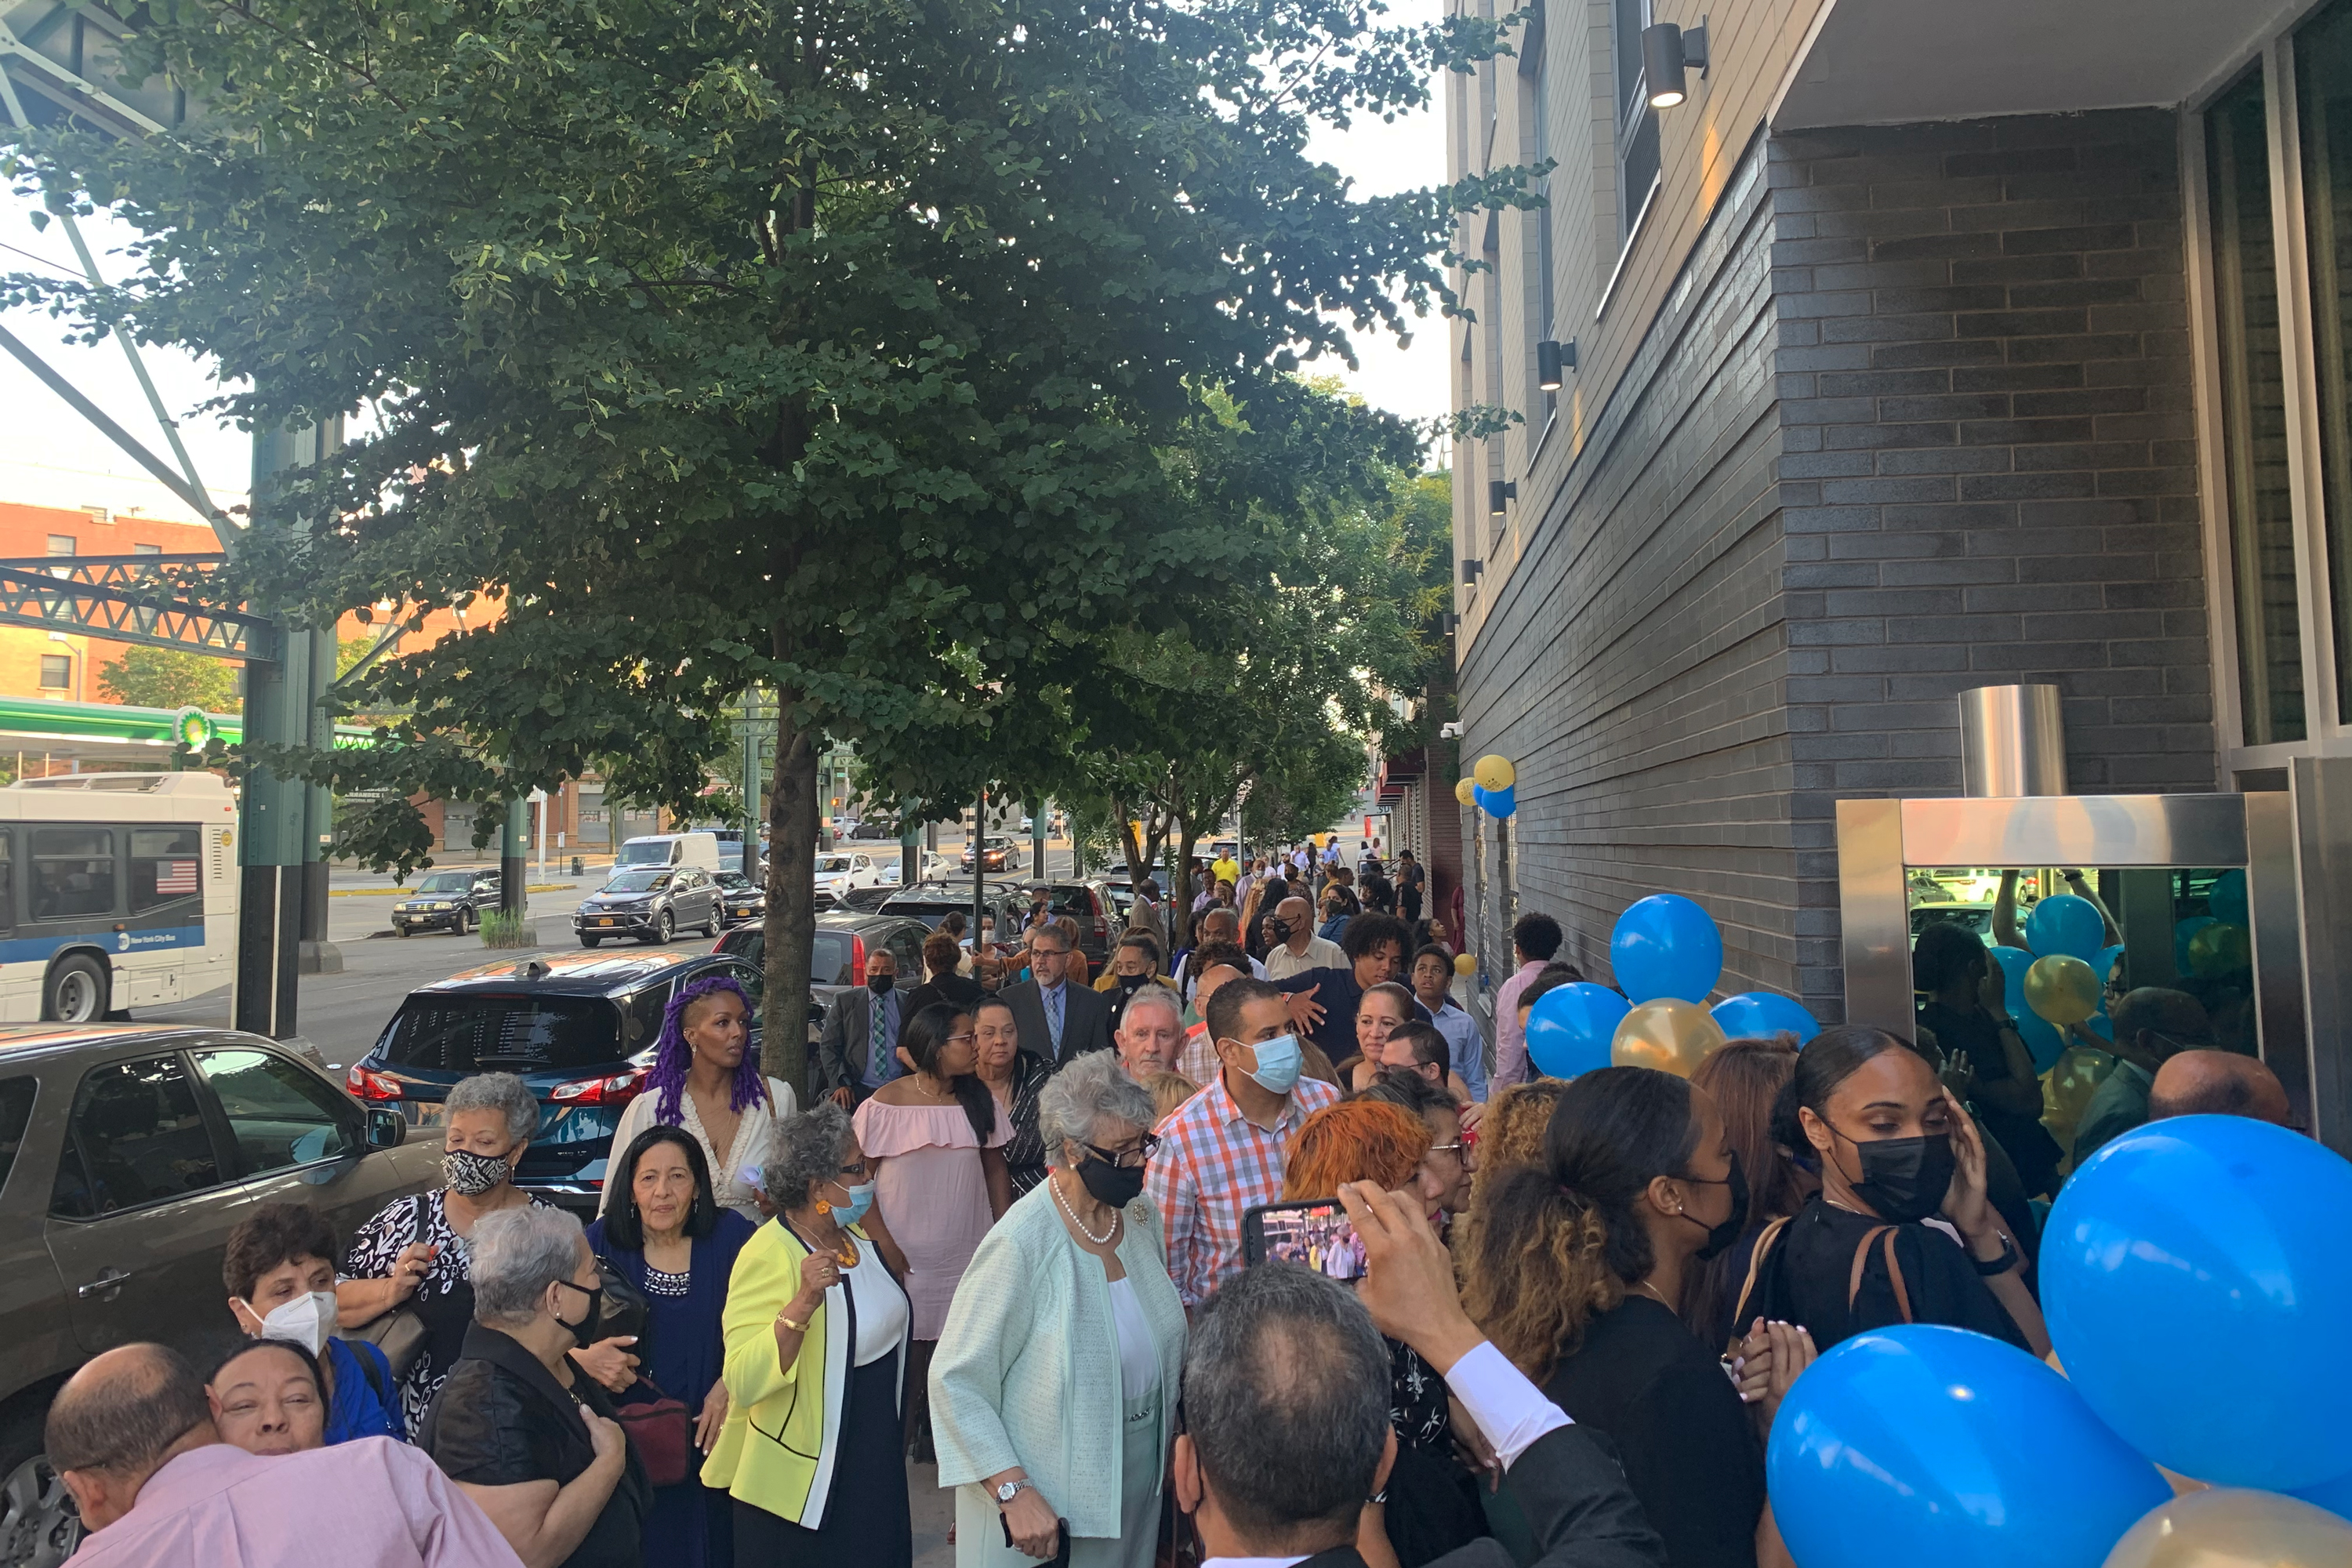 Congregants wait to enter the new home of the Bronx’ Evangelical Church Disciples of Christ, June 26, 2021.